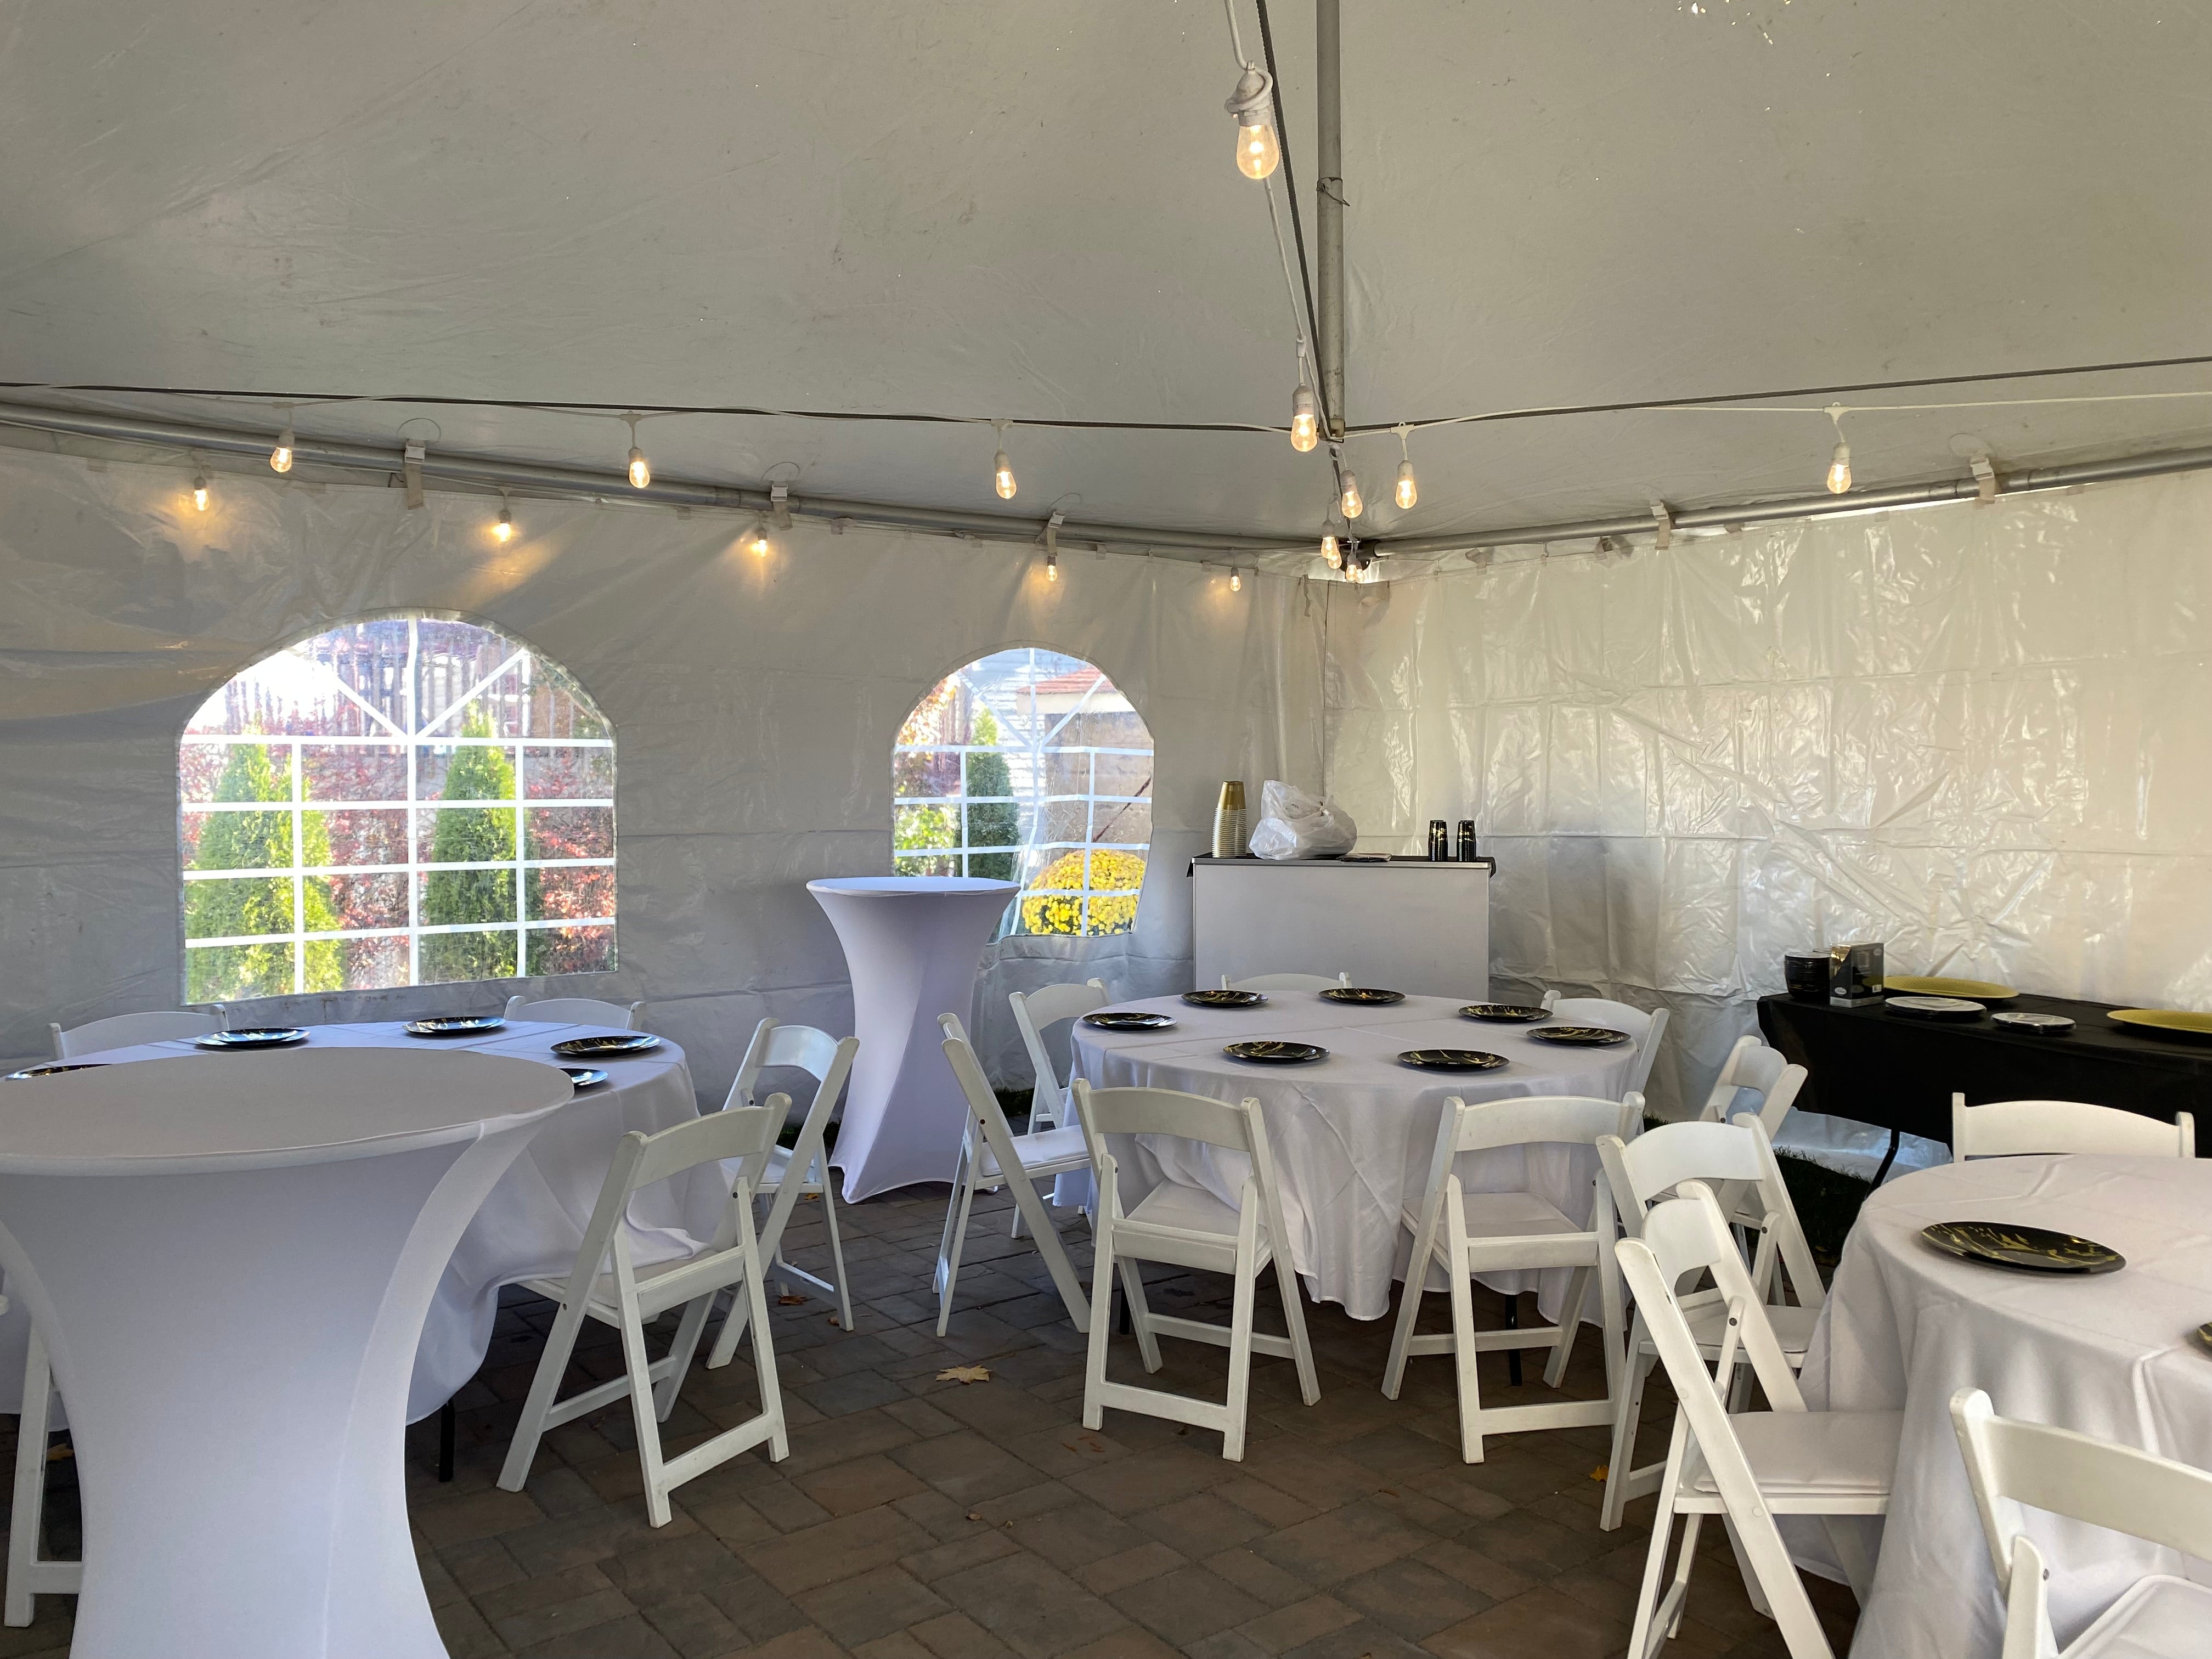 20 x 20 Stay Warm Party Rental Package